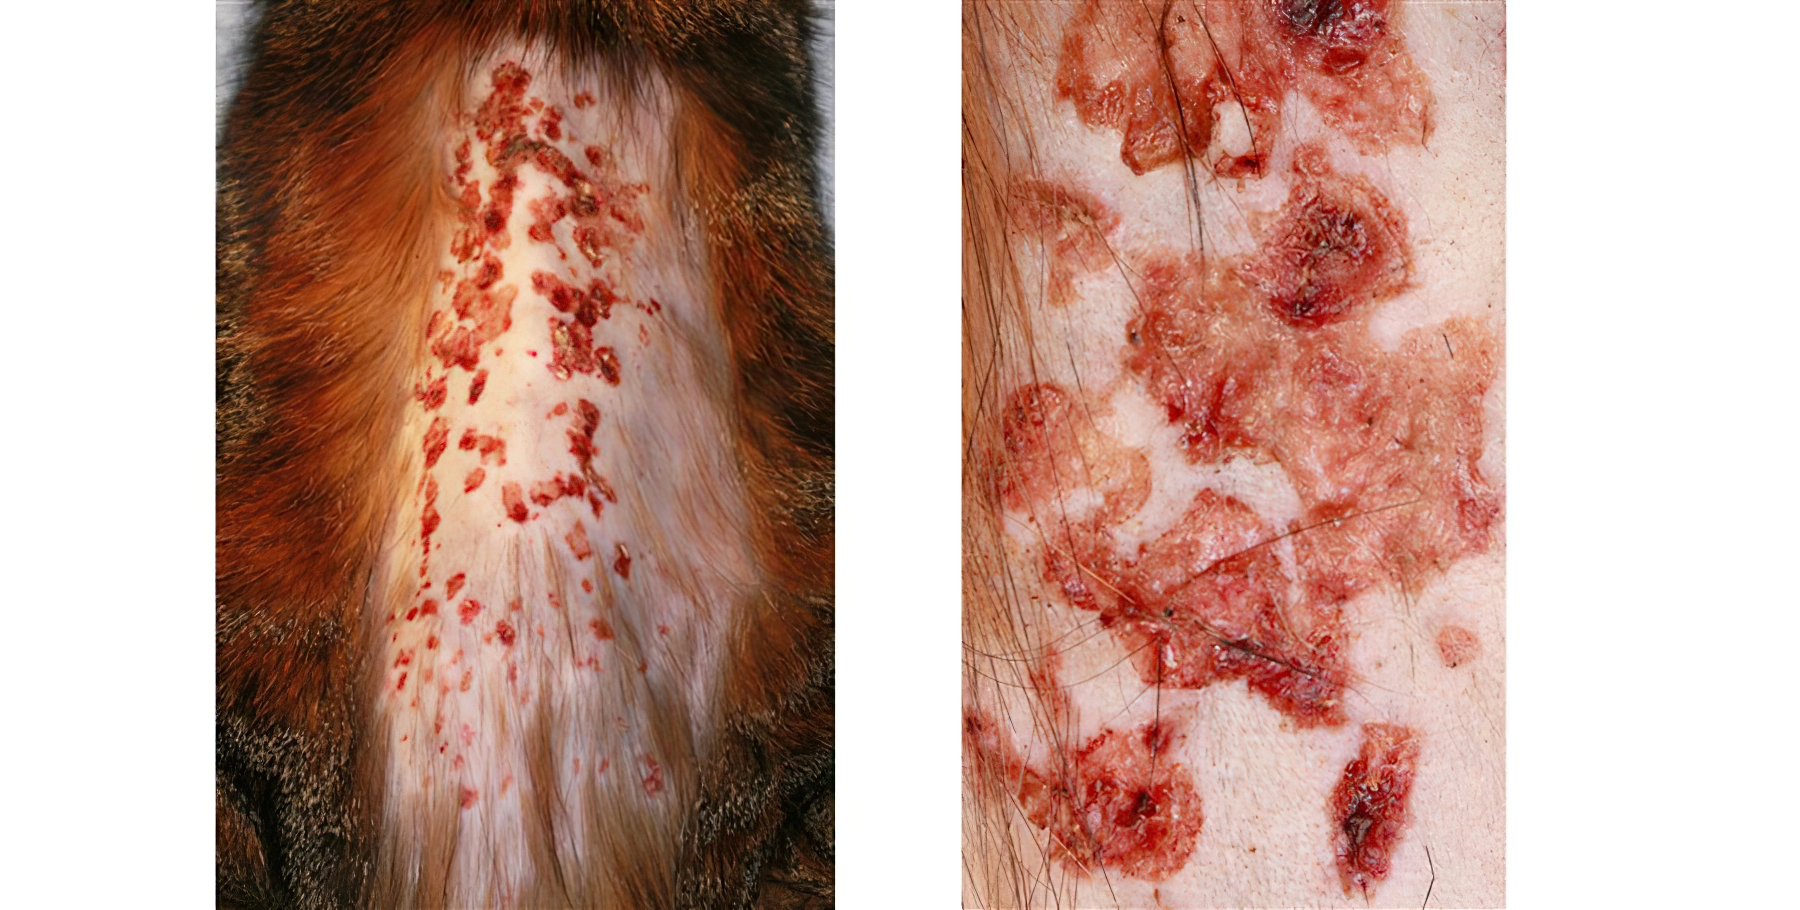 A Geriatric Cat with Ulcerative Alopecic Dermatitis: Paraneoplastic Dermatopathy, Primary Skin Cancer or an Adverse Drug Reaction?